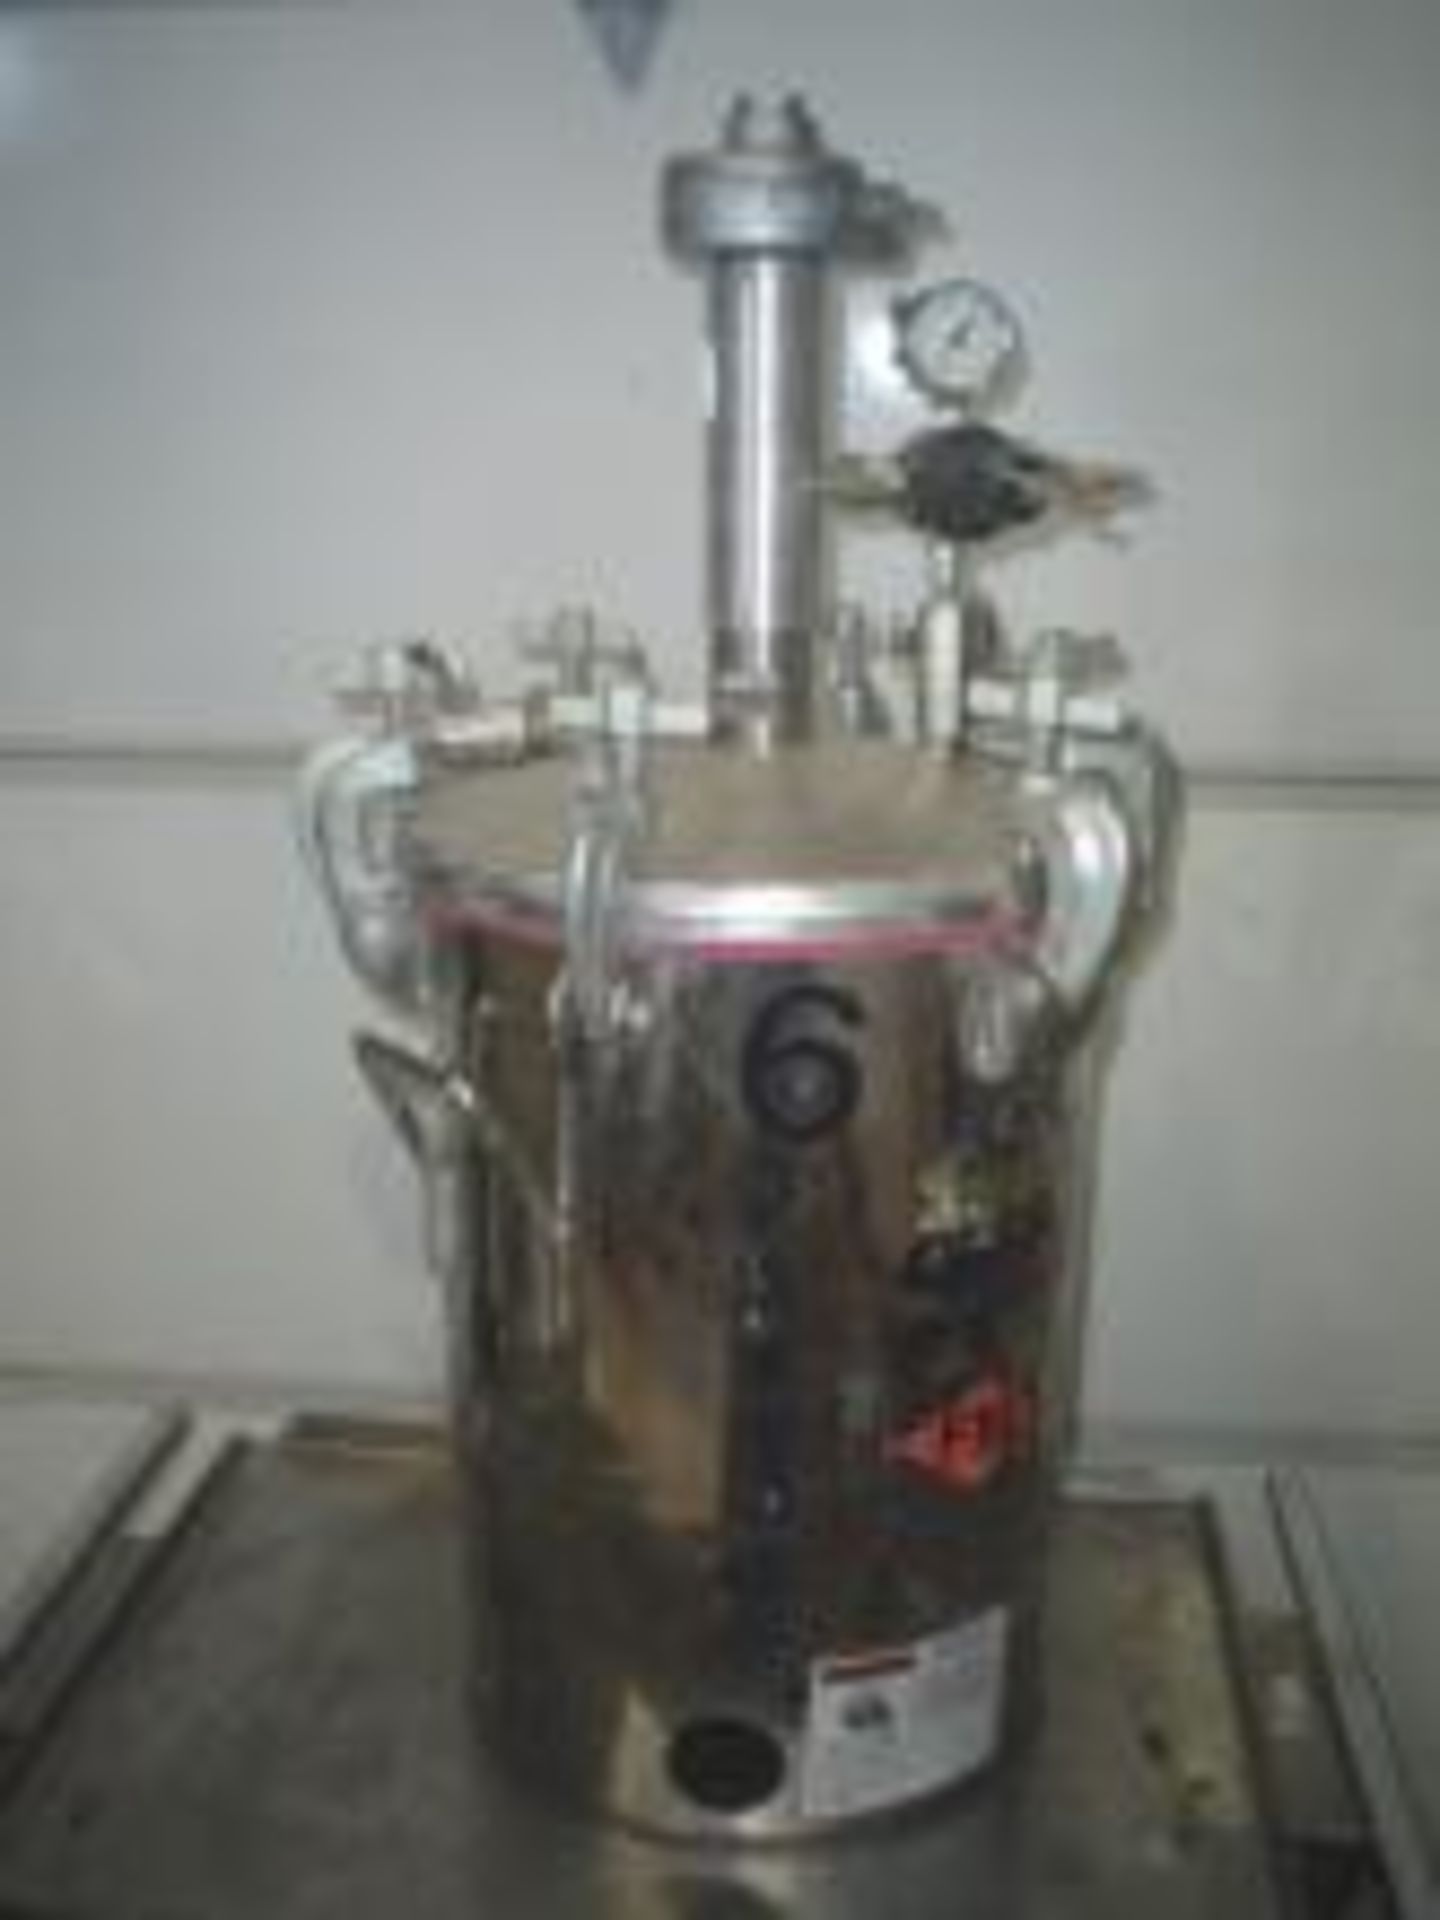 Lot includes: Qty 3. Used Devilbiss QMS 10 Gallon Stainless Steel Pressure Tanks with Pneumatic